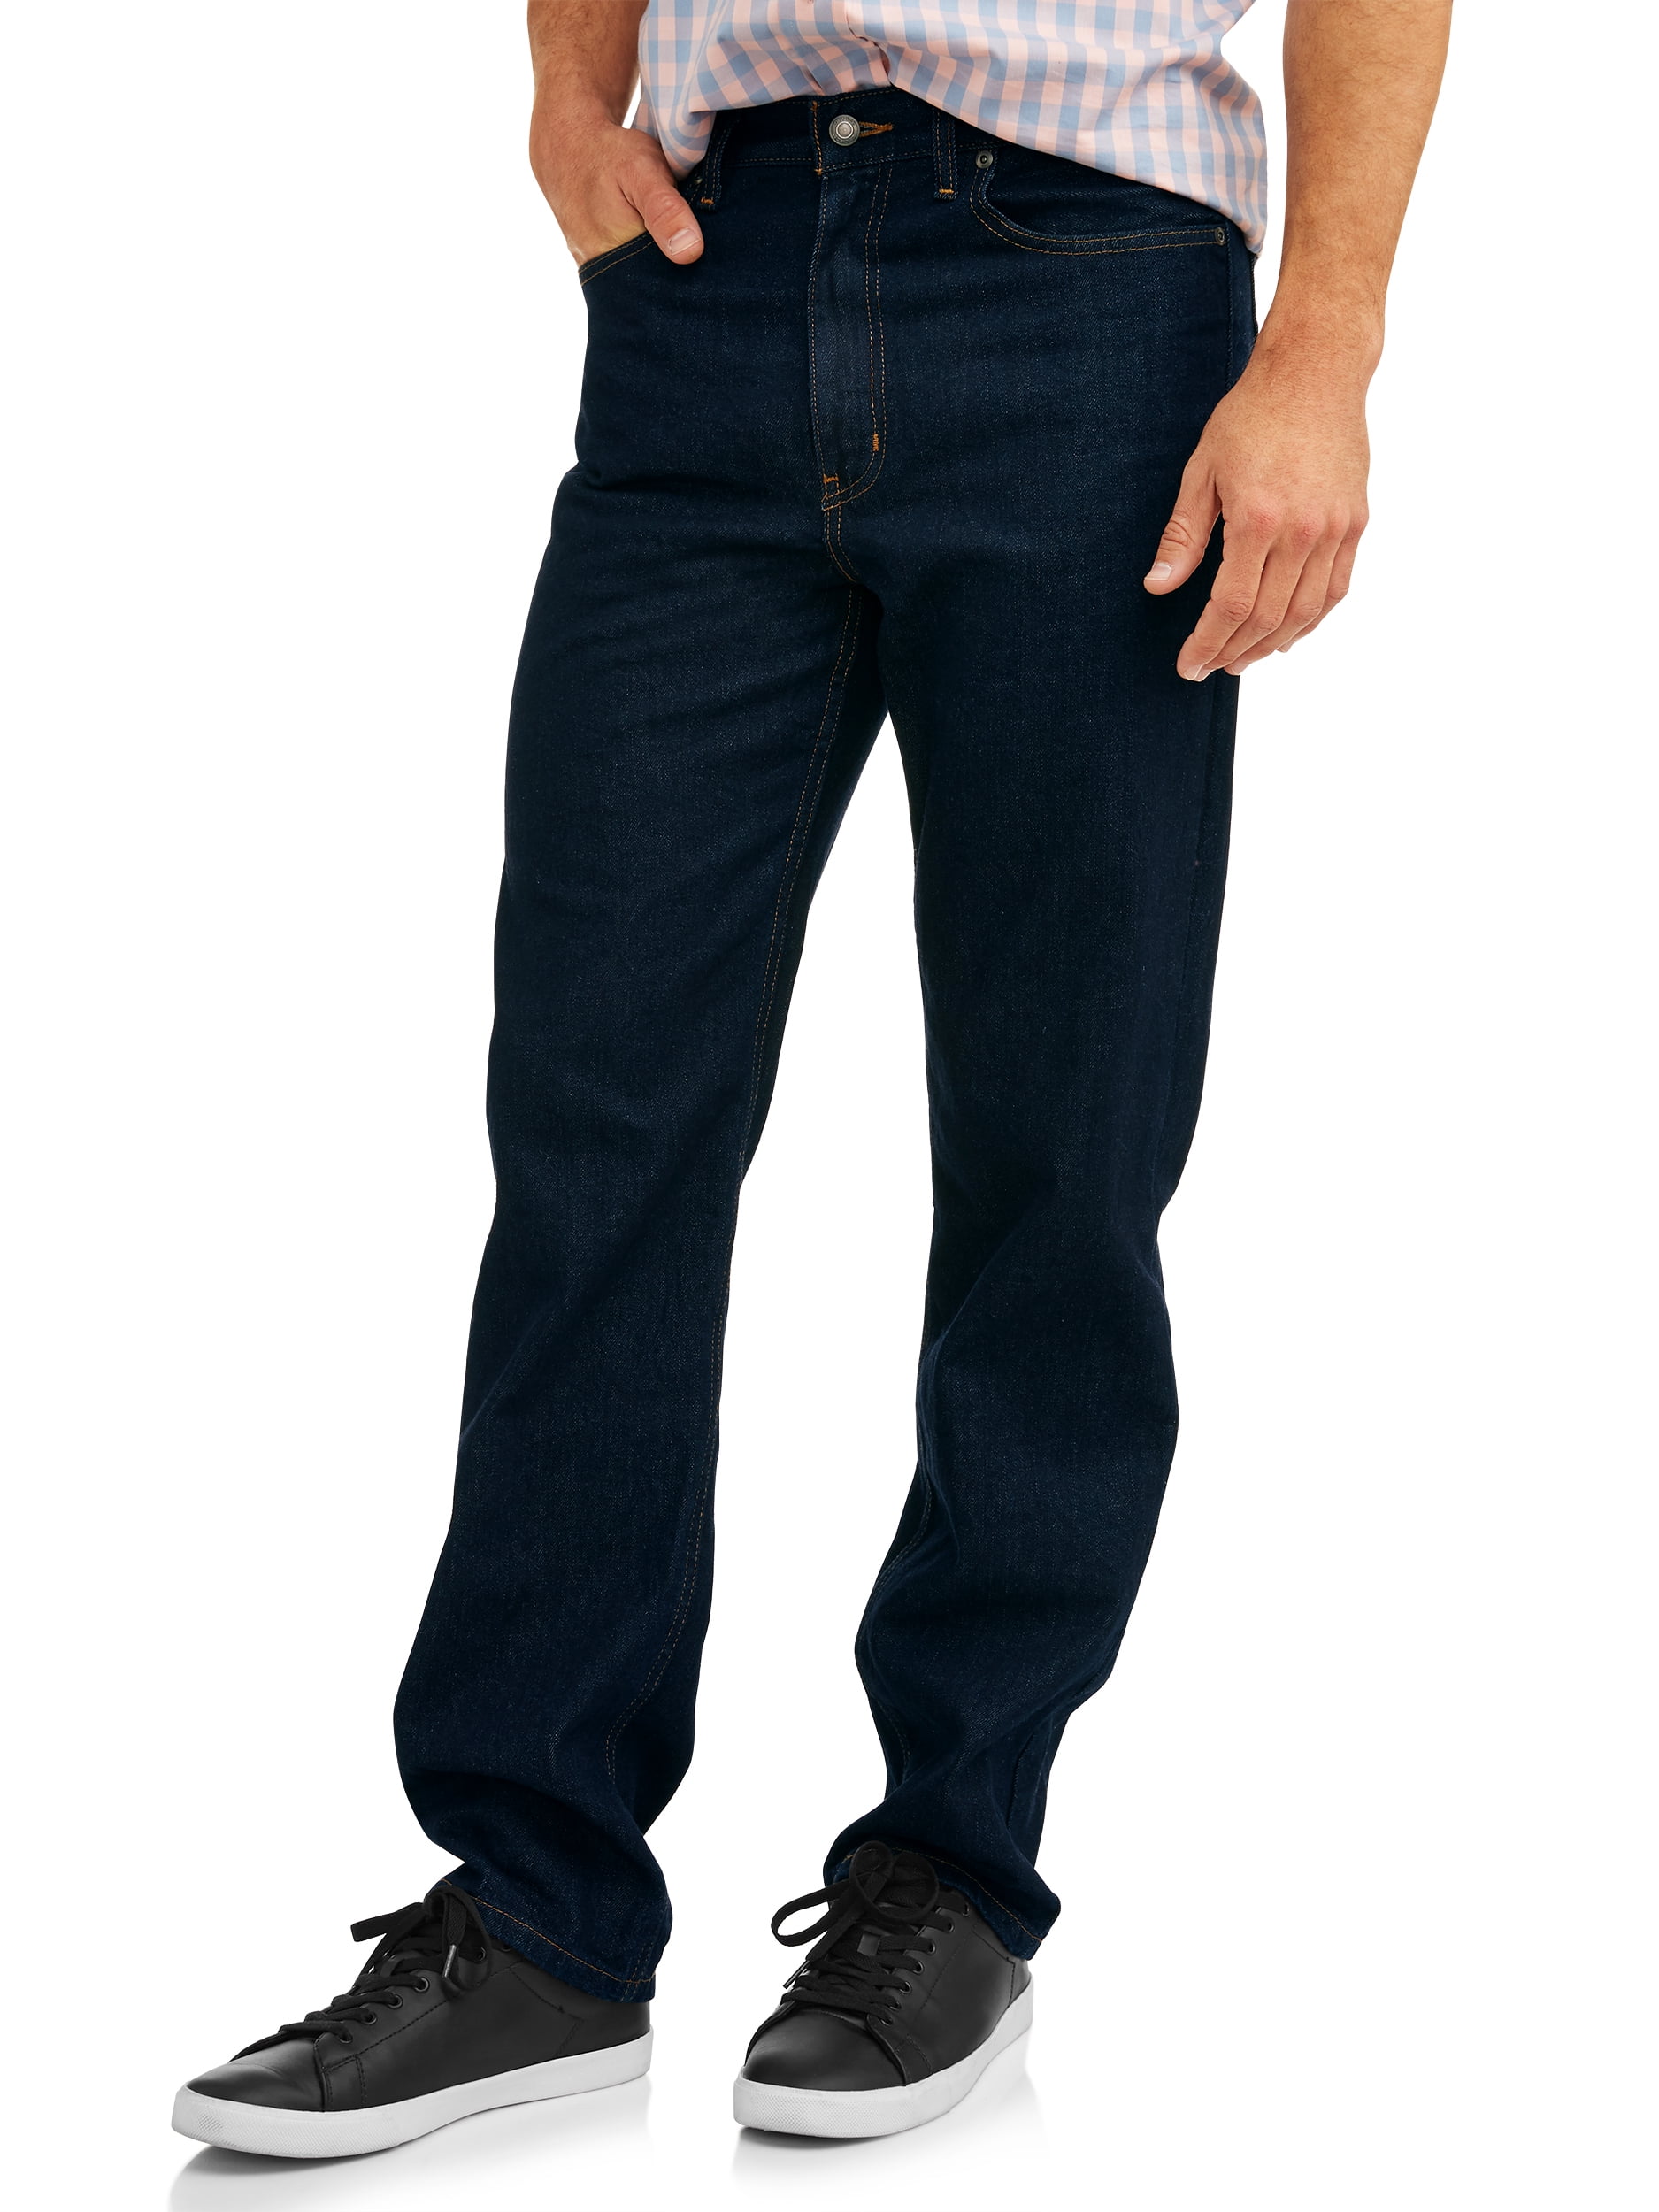 relaxed fit jeans walmart